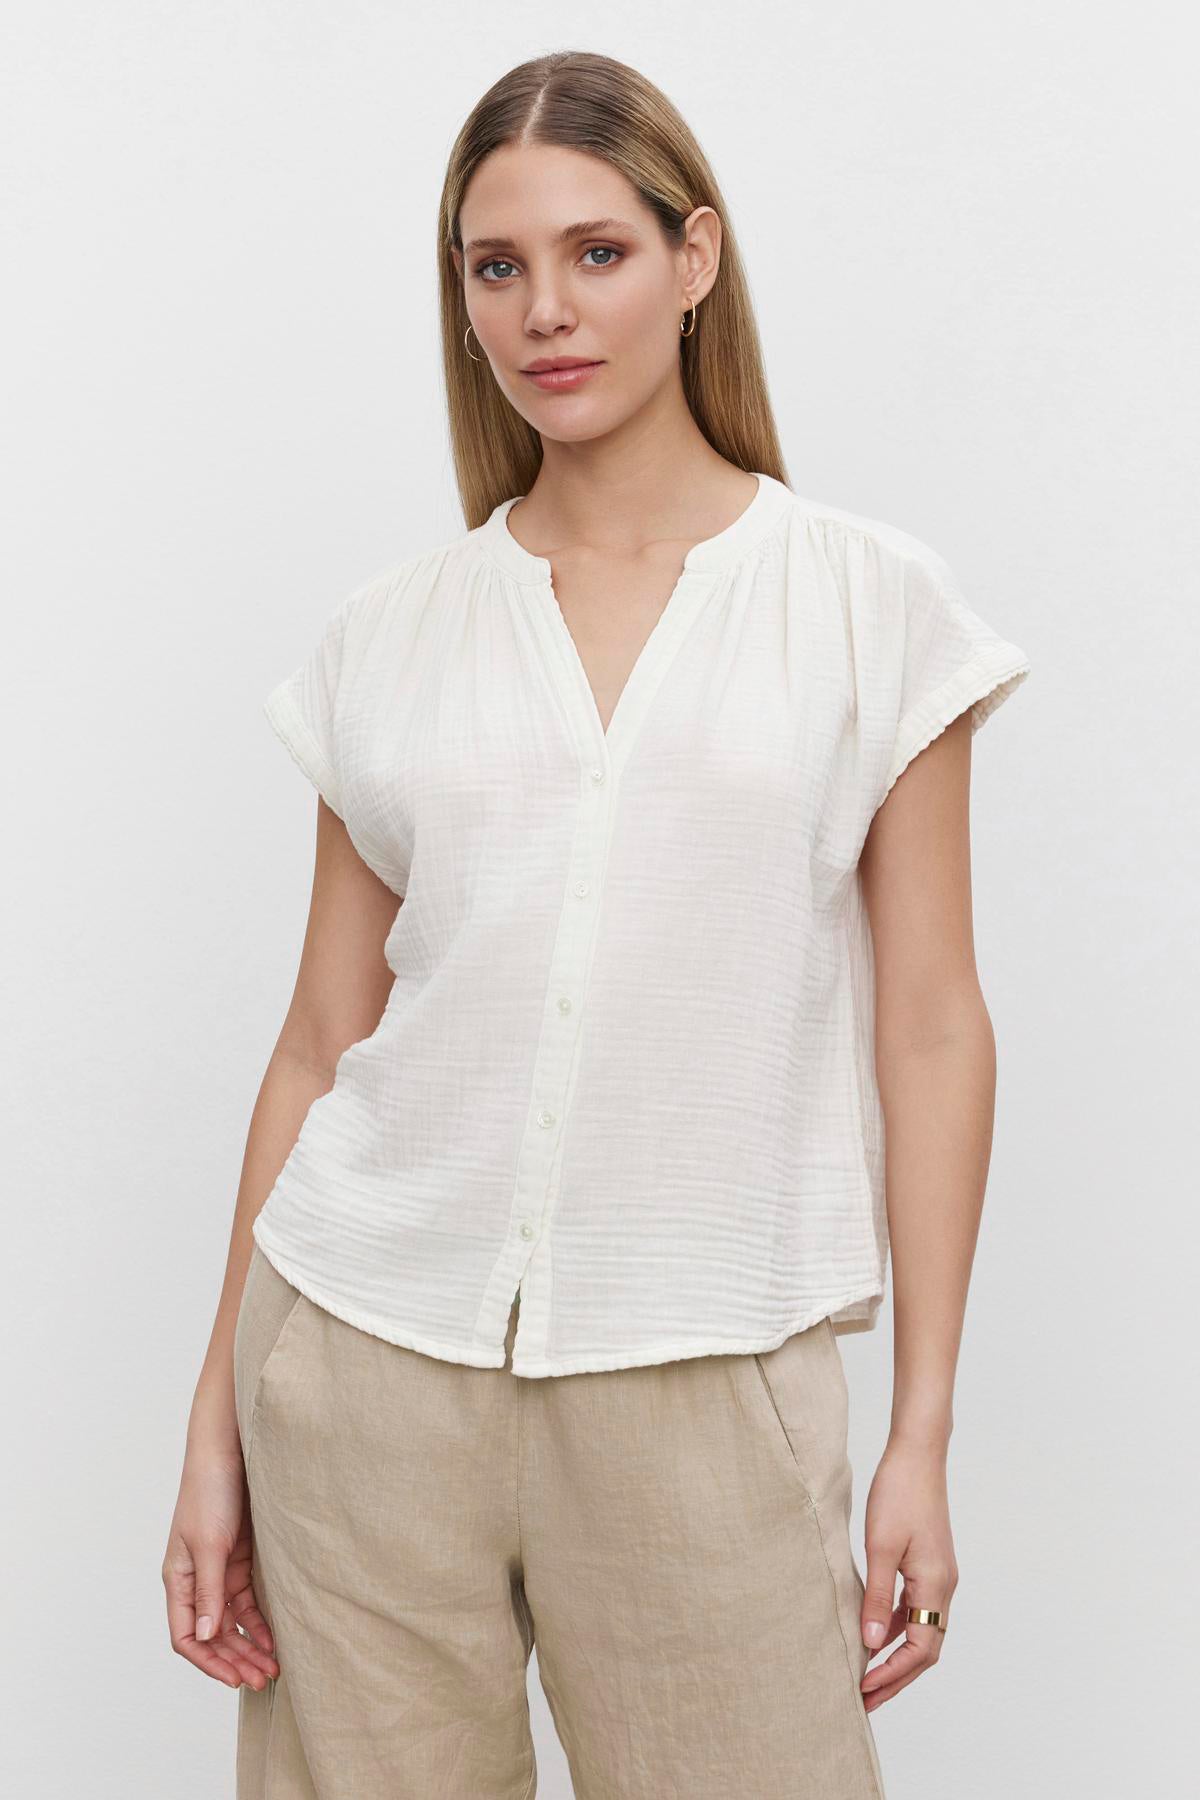 Woman in a Velvet by Graham & Spencer PAMELA COTTON GAUZE BUTTON-UP TOP white blouse and beige trousers standing against a plain background.-36532955250881